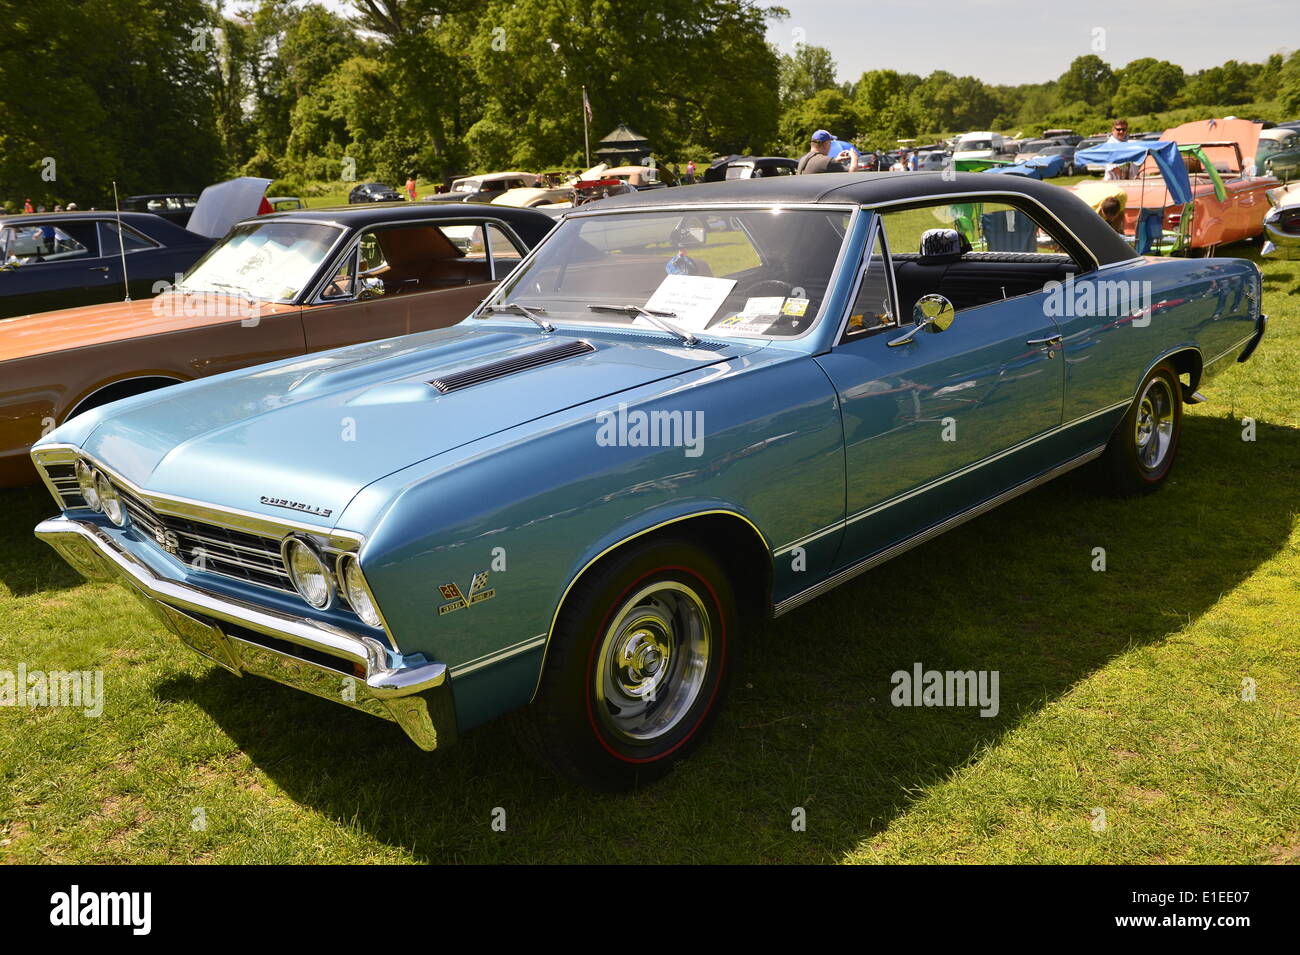 Old Westbury, New York, USA. 01st June, 2014. Old Westbury, New York, U.S. - June 1, 2014 - A blue 1967 Chevrolet Chevelle SS 396, owner Artie Stavros, is an entry at the Antique and Collectible Auto Show held on the historic grounds of elegant Old Westbury Gardens in Long Island, and sponsored by Greater New York Region AACA Antique Automobile Club of America. Credit:  Ann E Parry/Alamy Live News Stock Photo